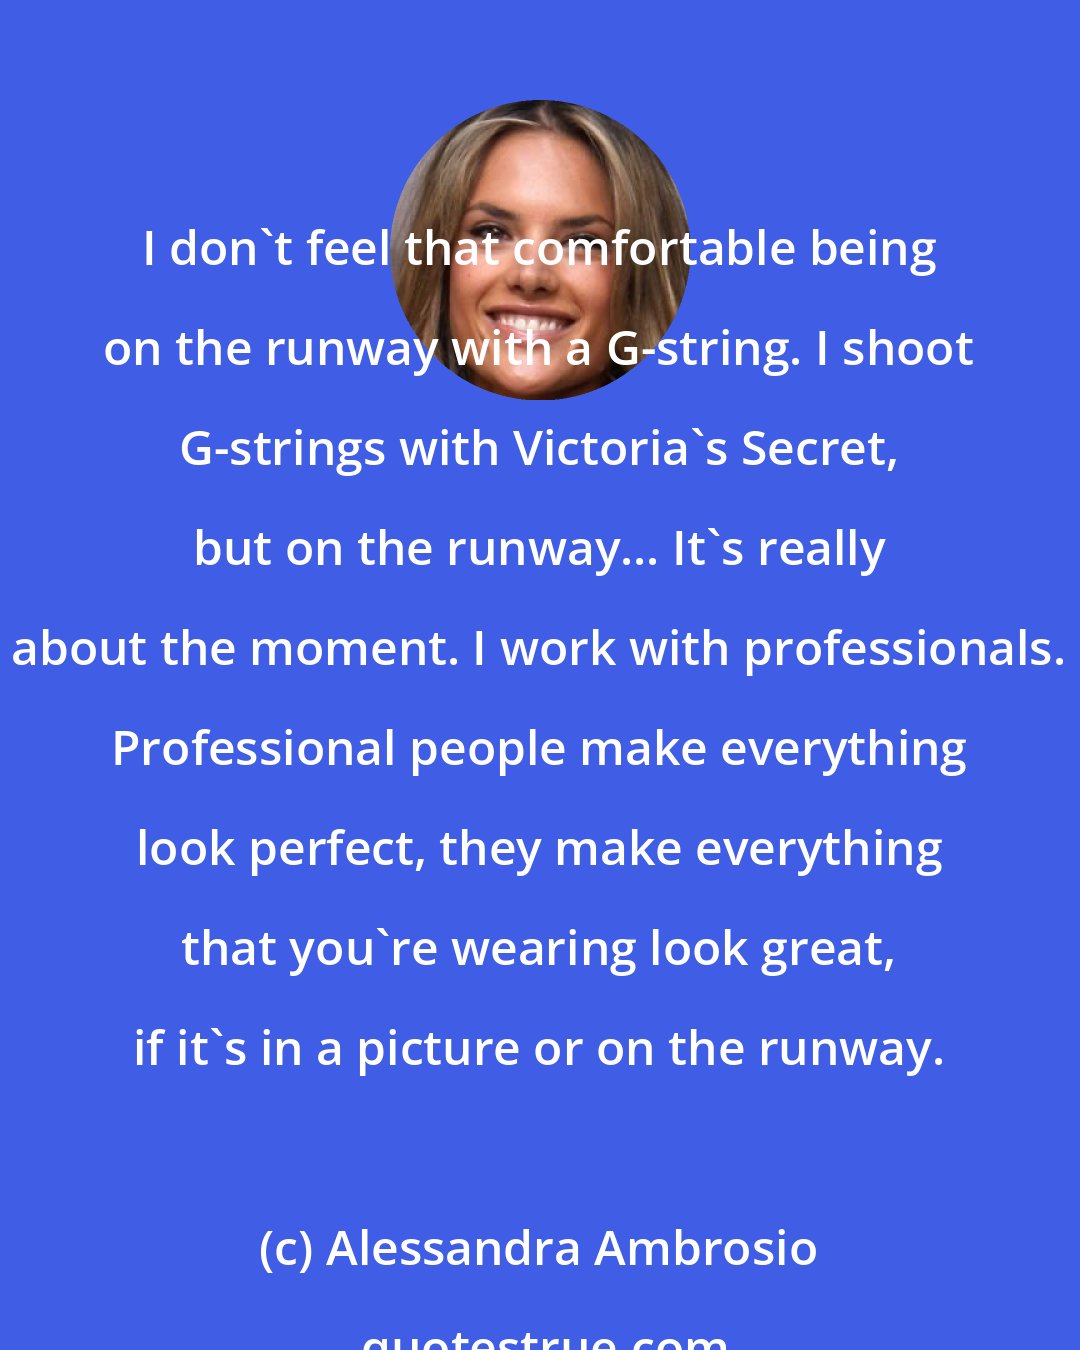 Alessandra Ambrosio: I don't feel that comfortable being on the runway with a G-string. I shoot G-strings with Victoria's Secret, but on the runway... It's really about the moment. I work with professionals. Professional people make everything look perfect, they make everything that you're wearing look great, if it's in a picture or on the runway.